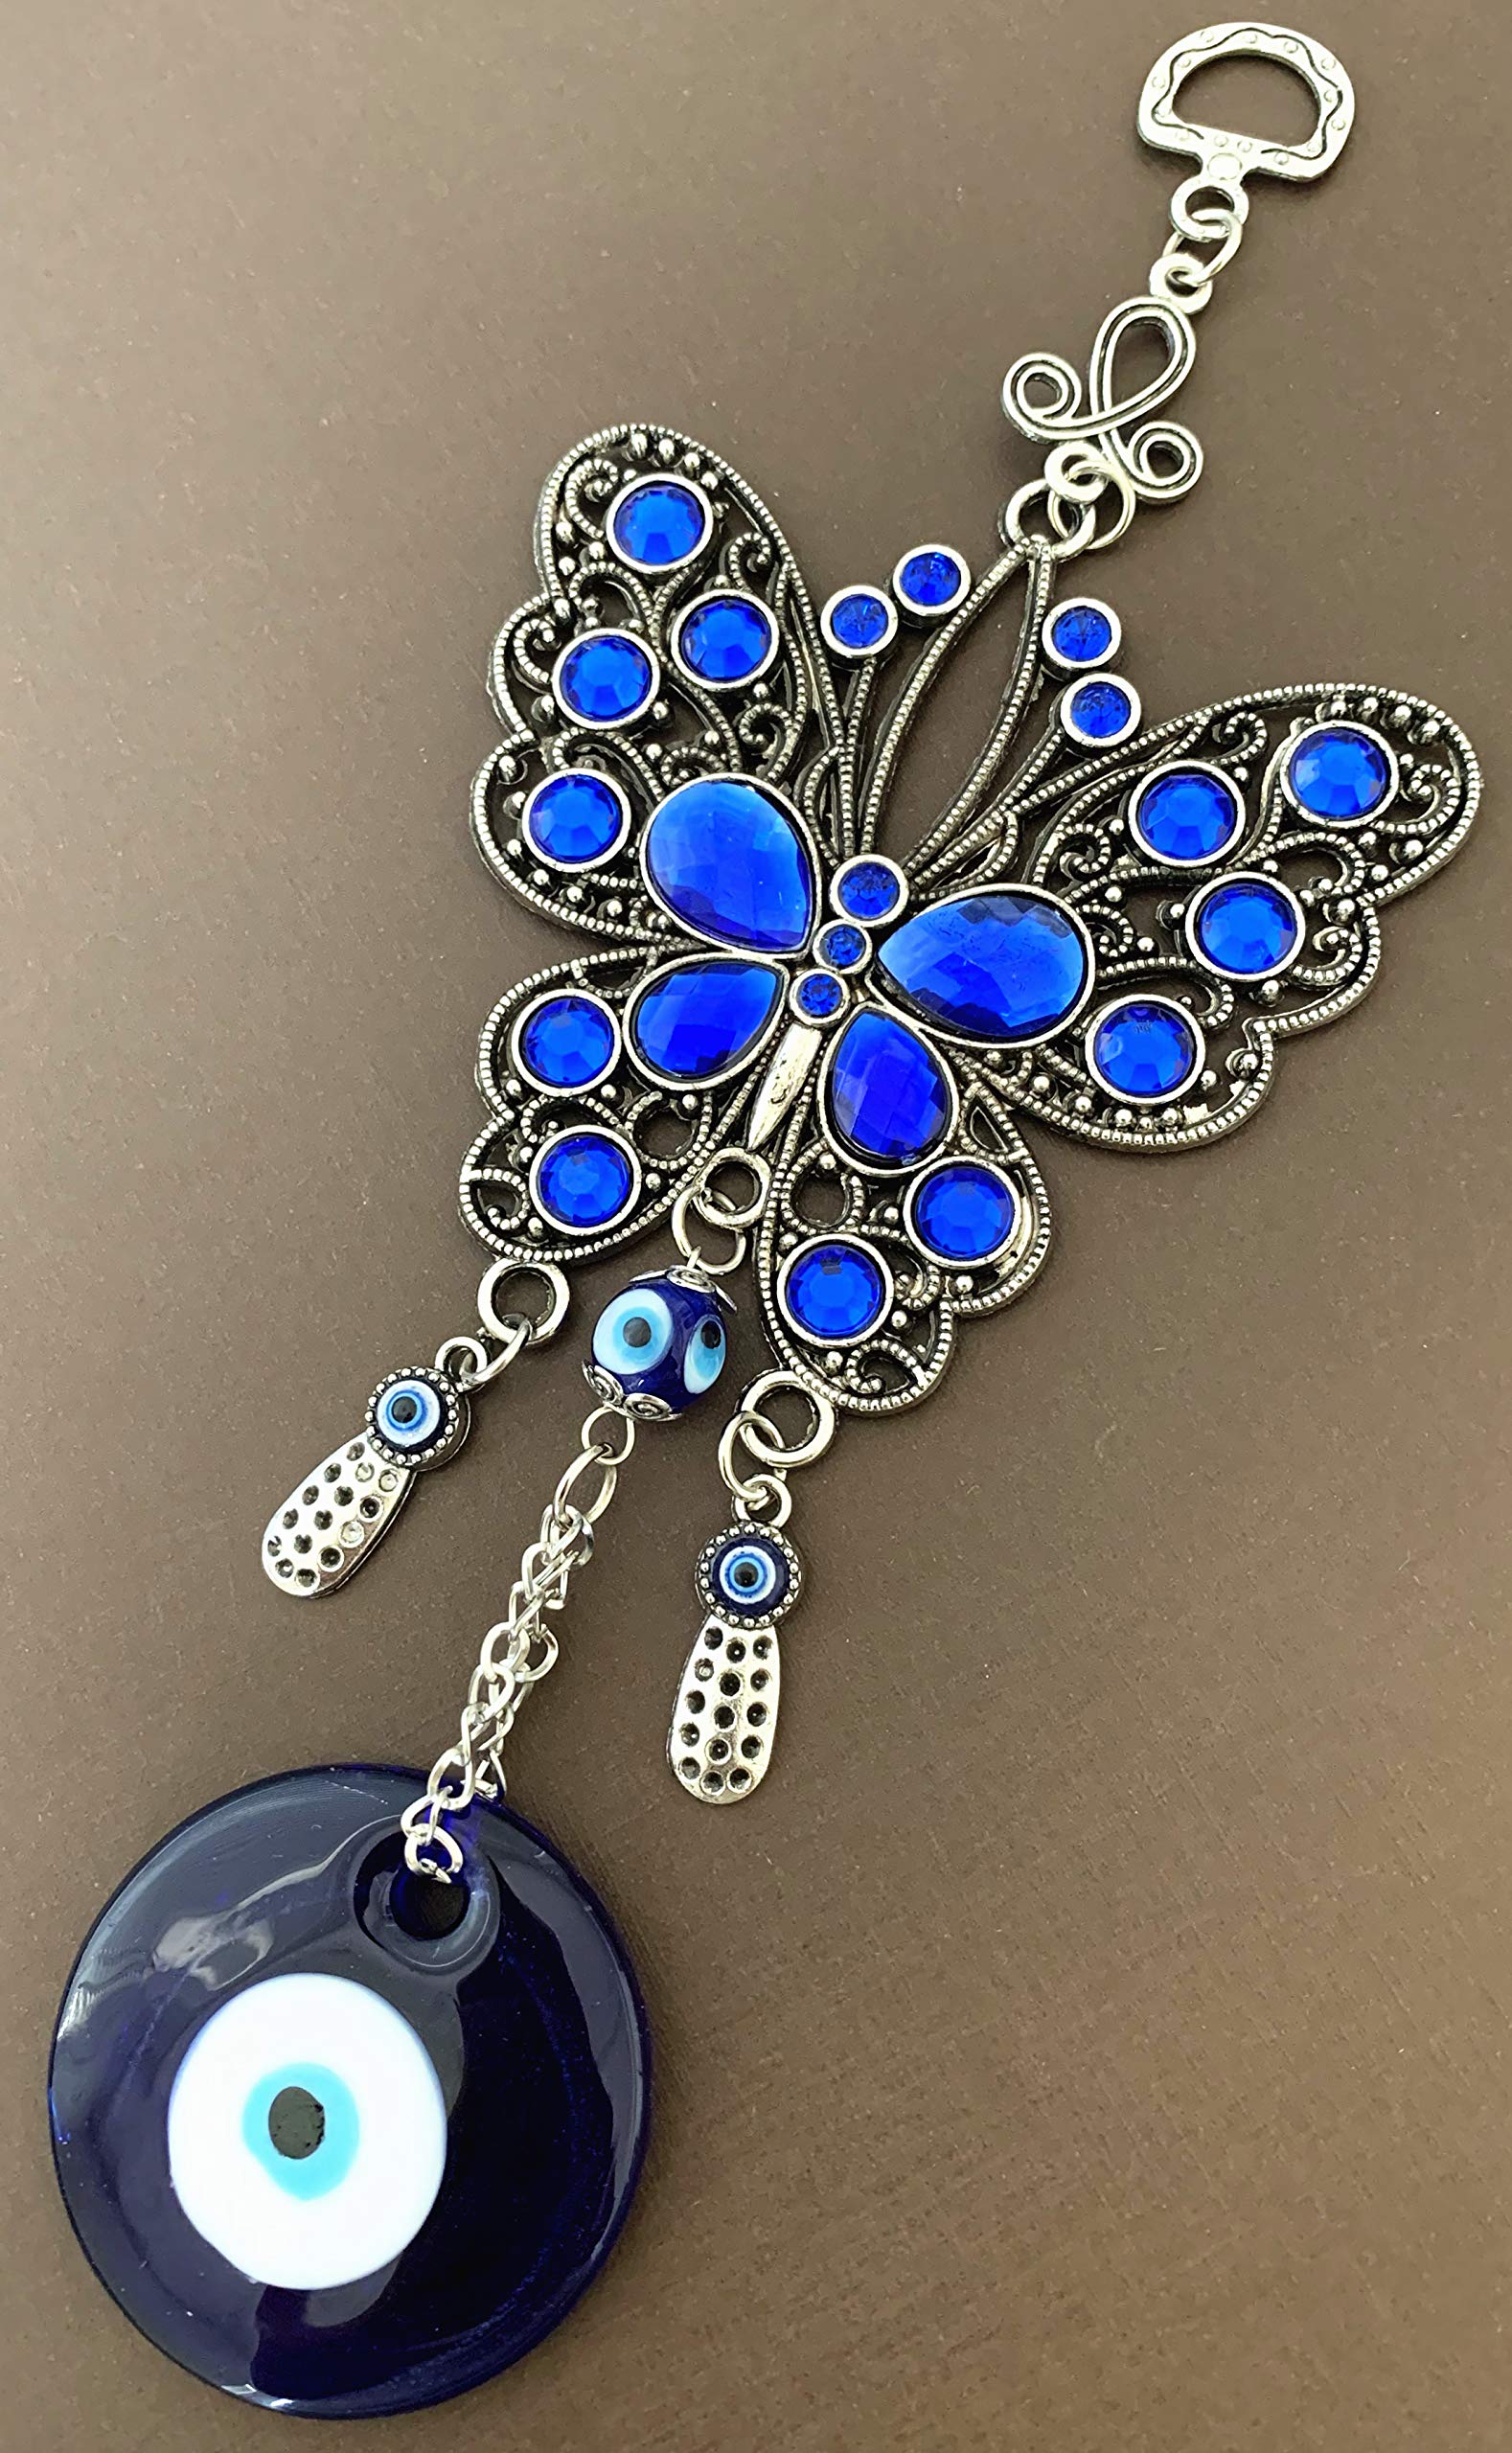 Turkish Blue Evil Eye Butterfly Design Amulet Home Office Hanging Decoration Ornament Blessing Gift -CL10